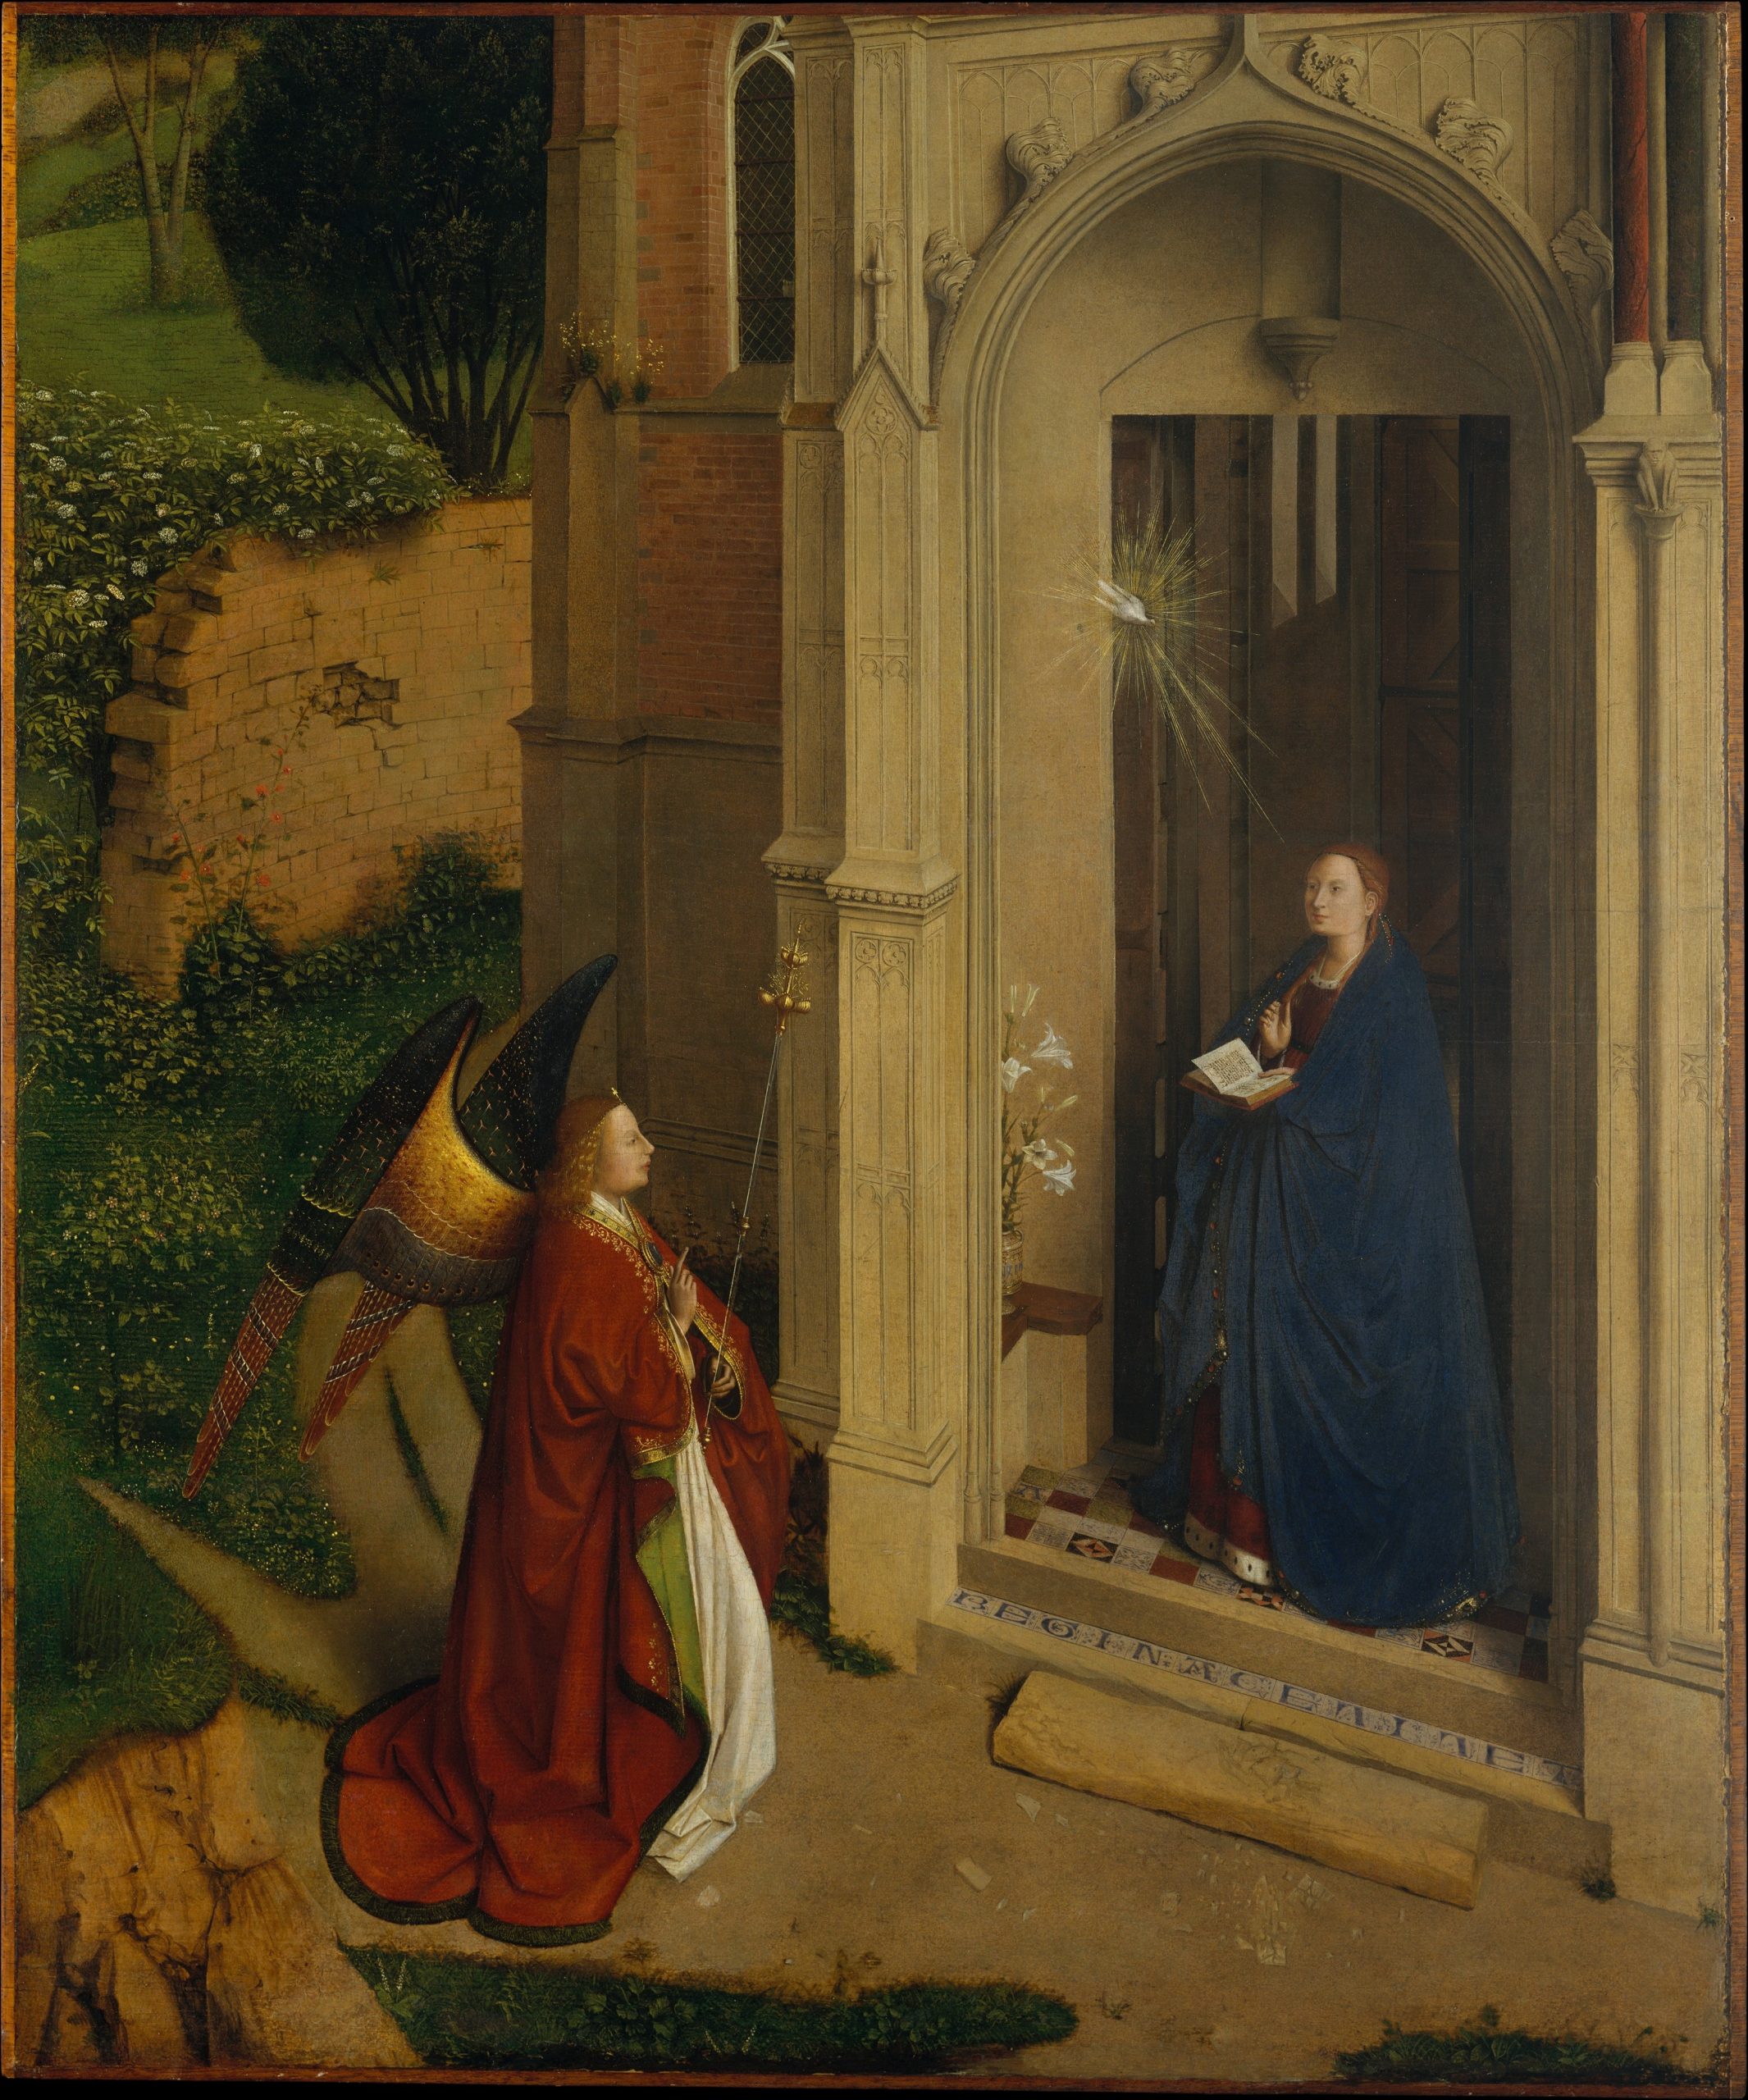 A woman stands in a doorway holding an open book while an angel greets her from a pathway leading to the door.